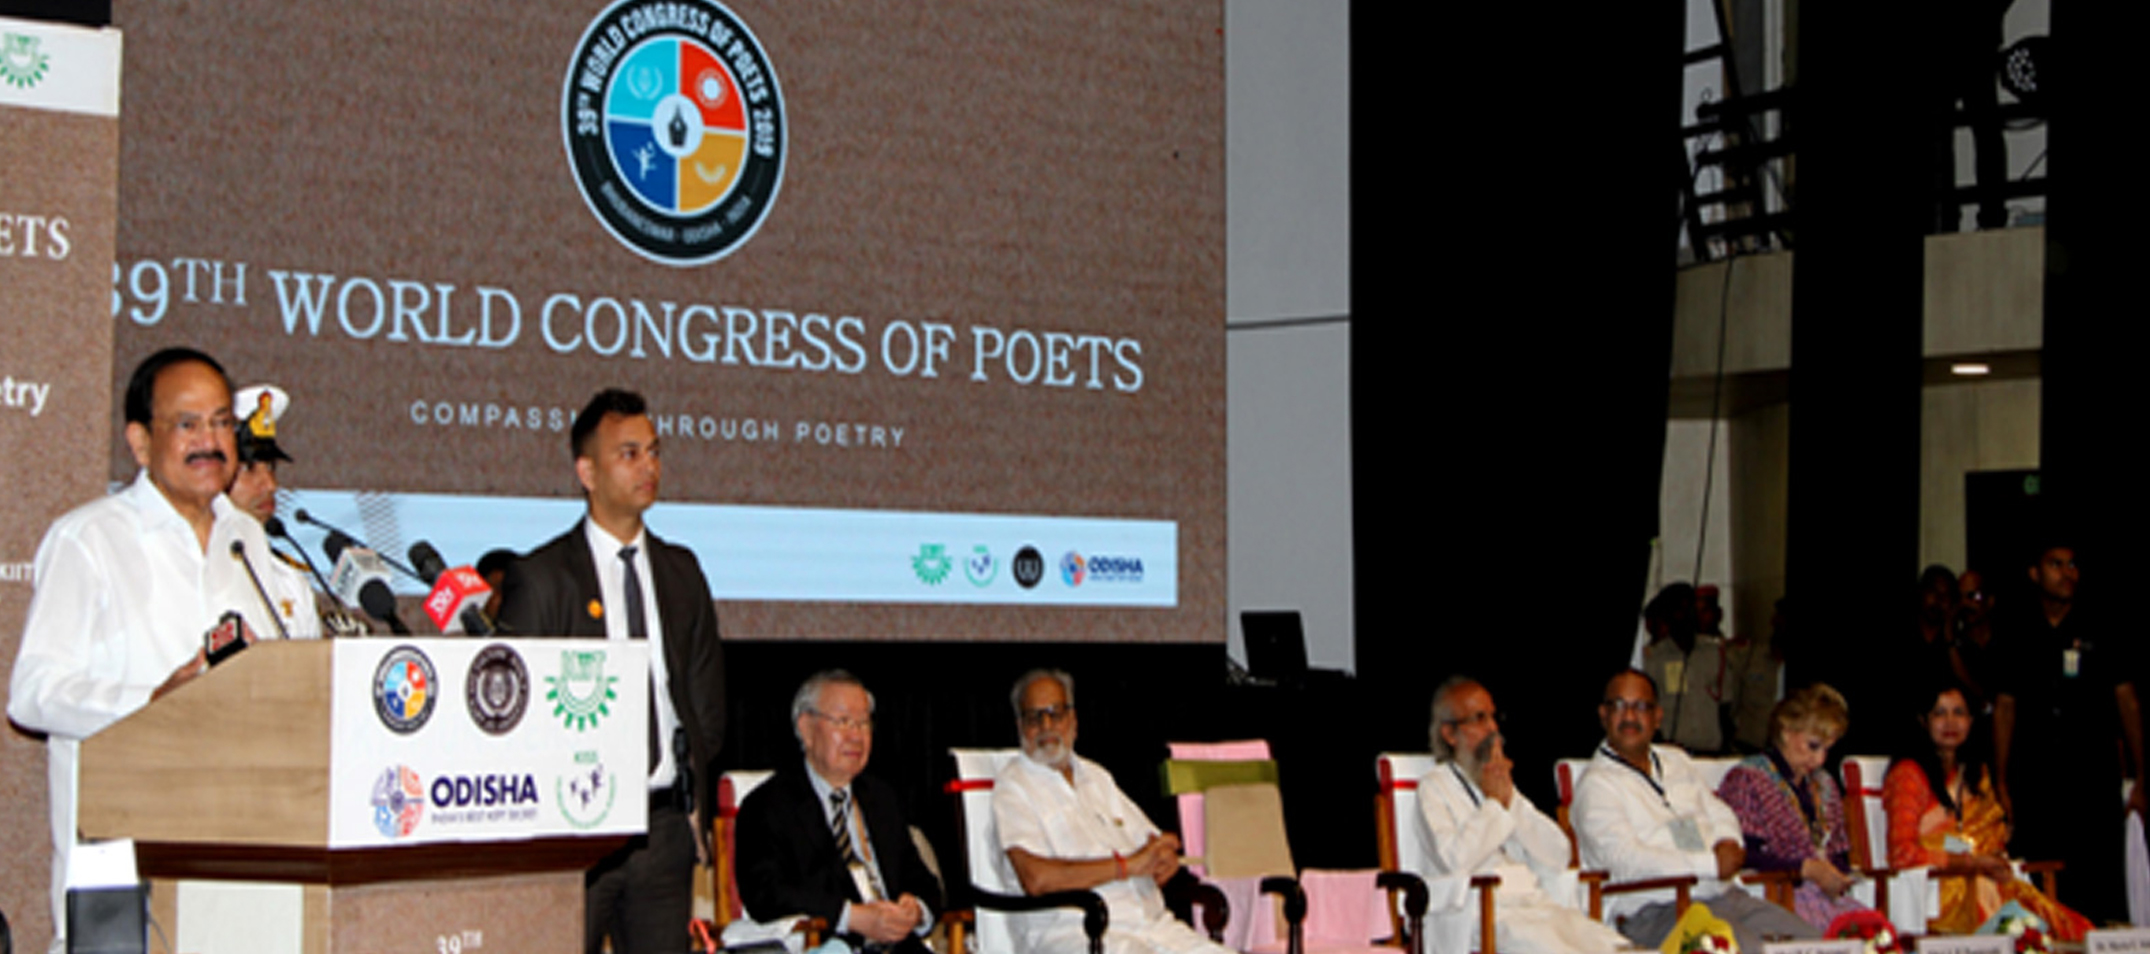 KIIT to host 39th World Congress of Poets